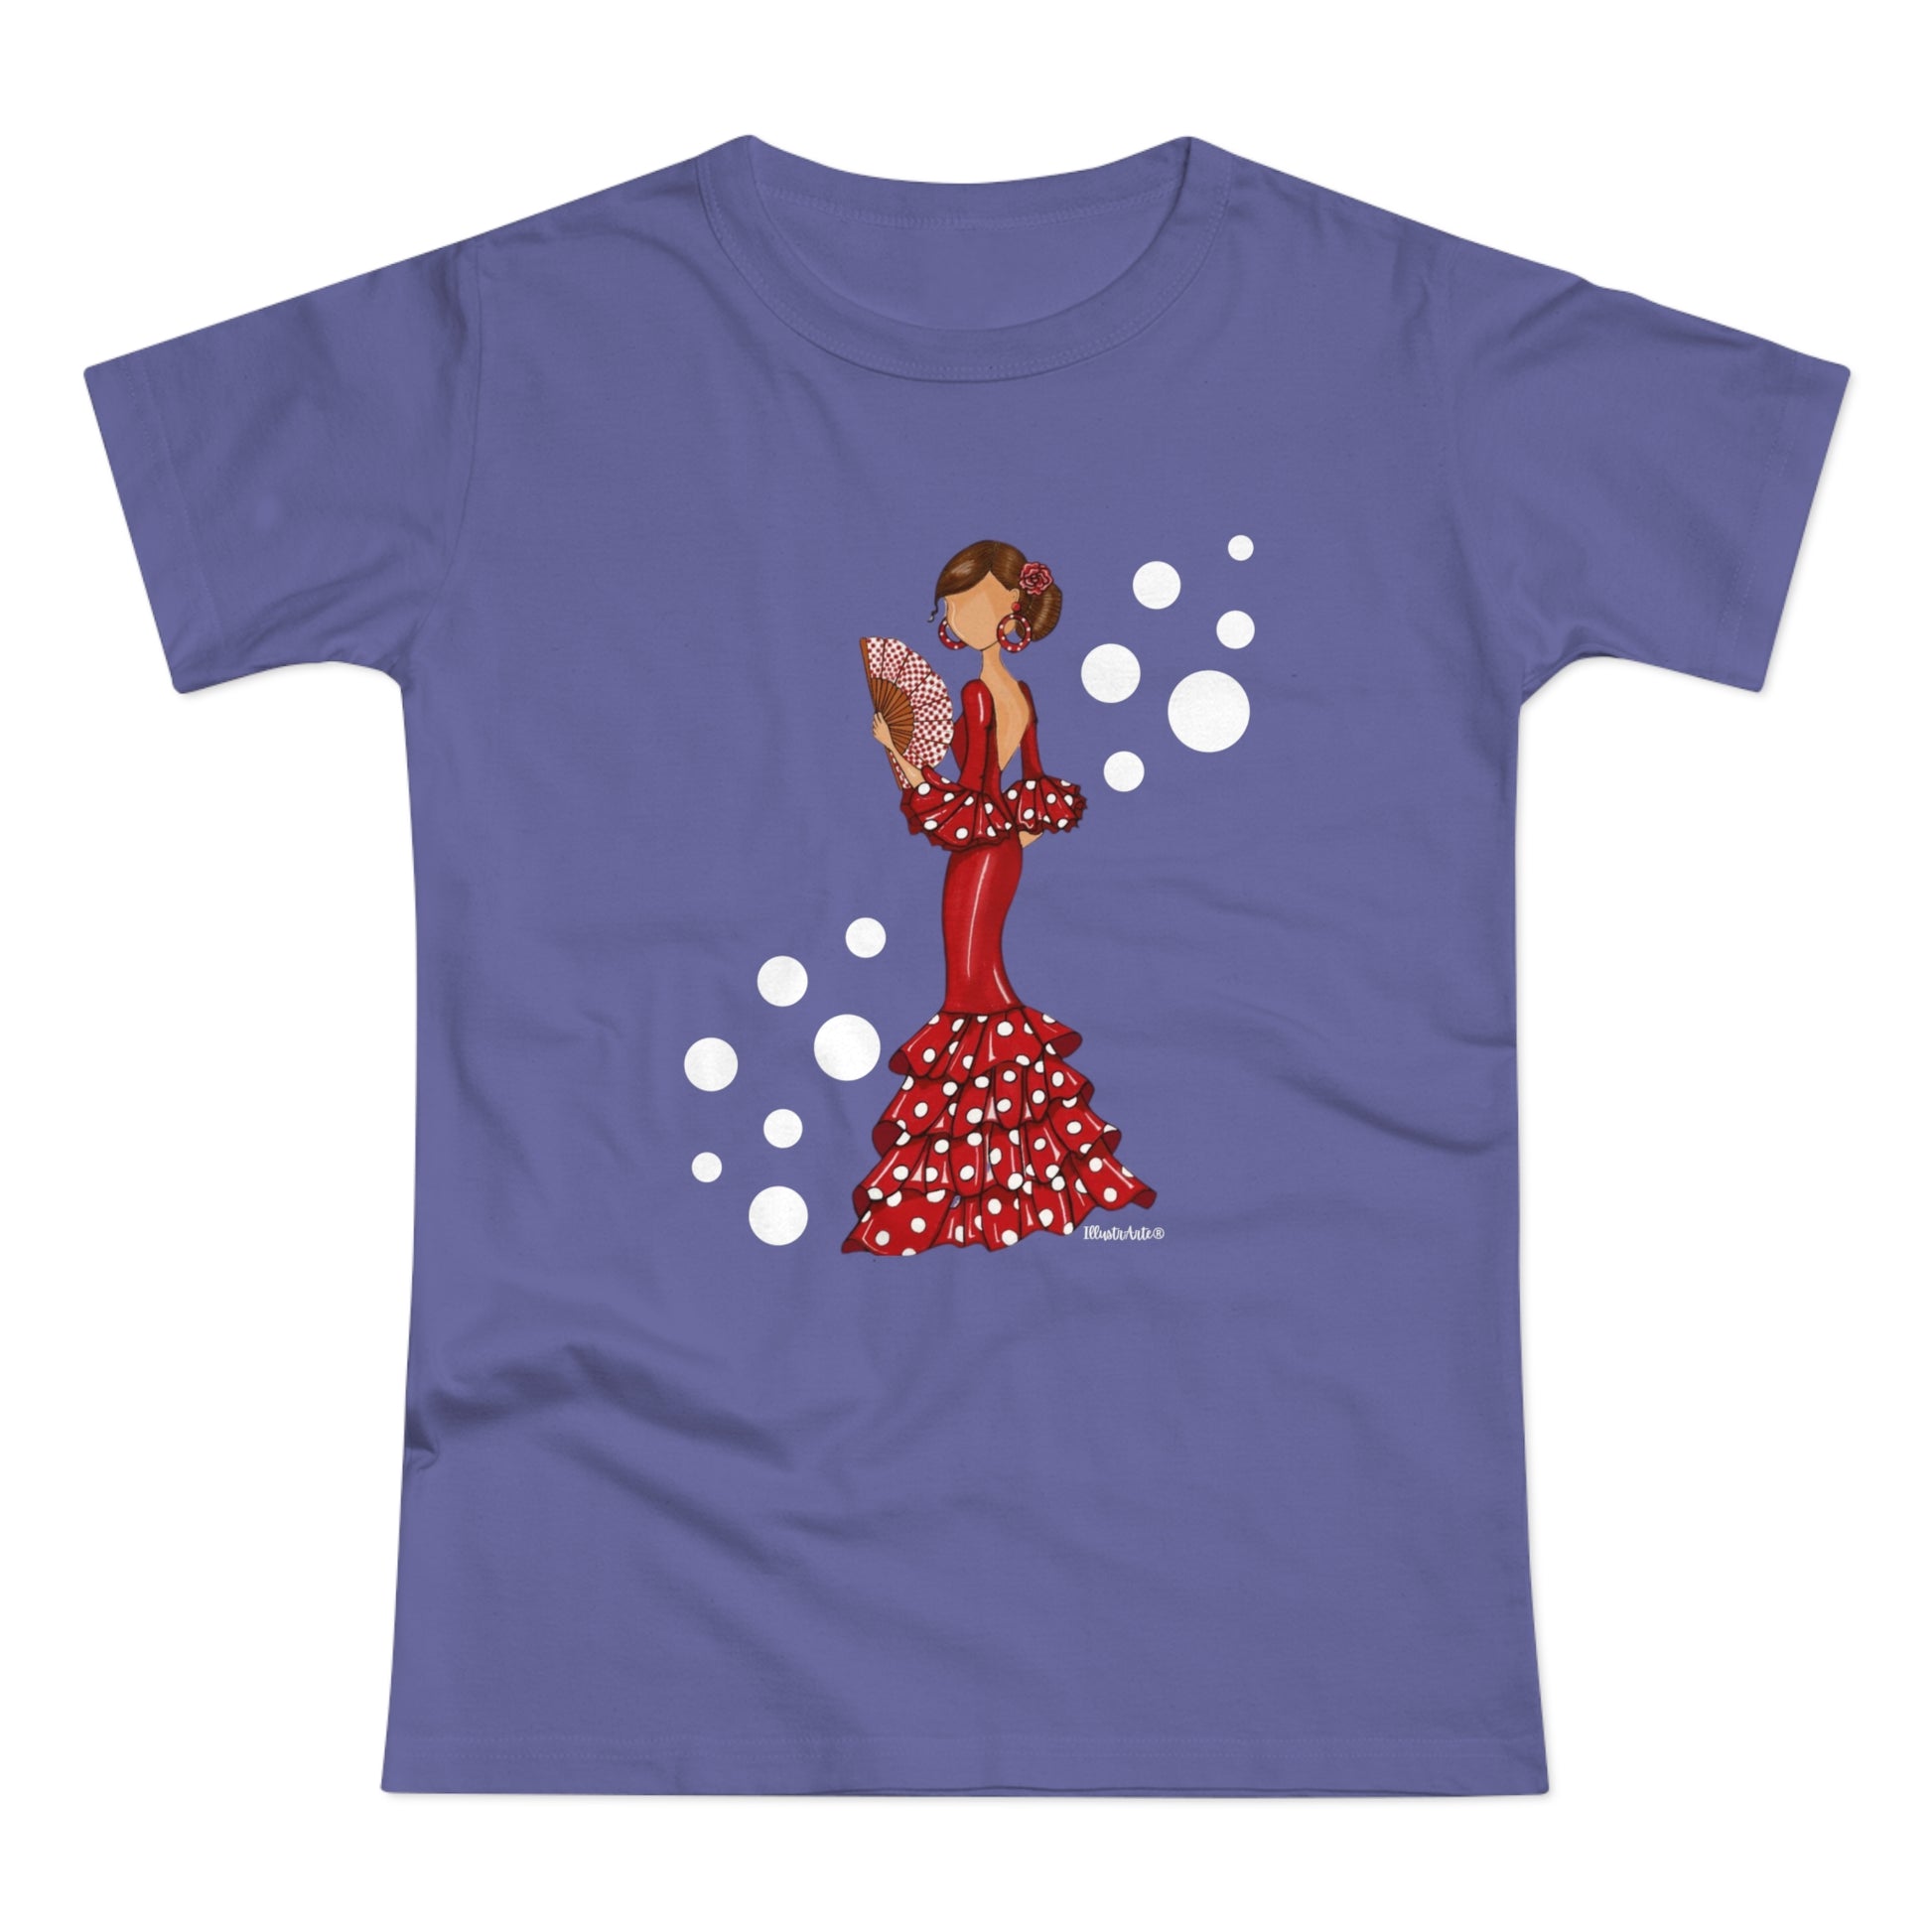 a women's t - shirt with a woman in a polka dot dress holding